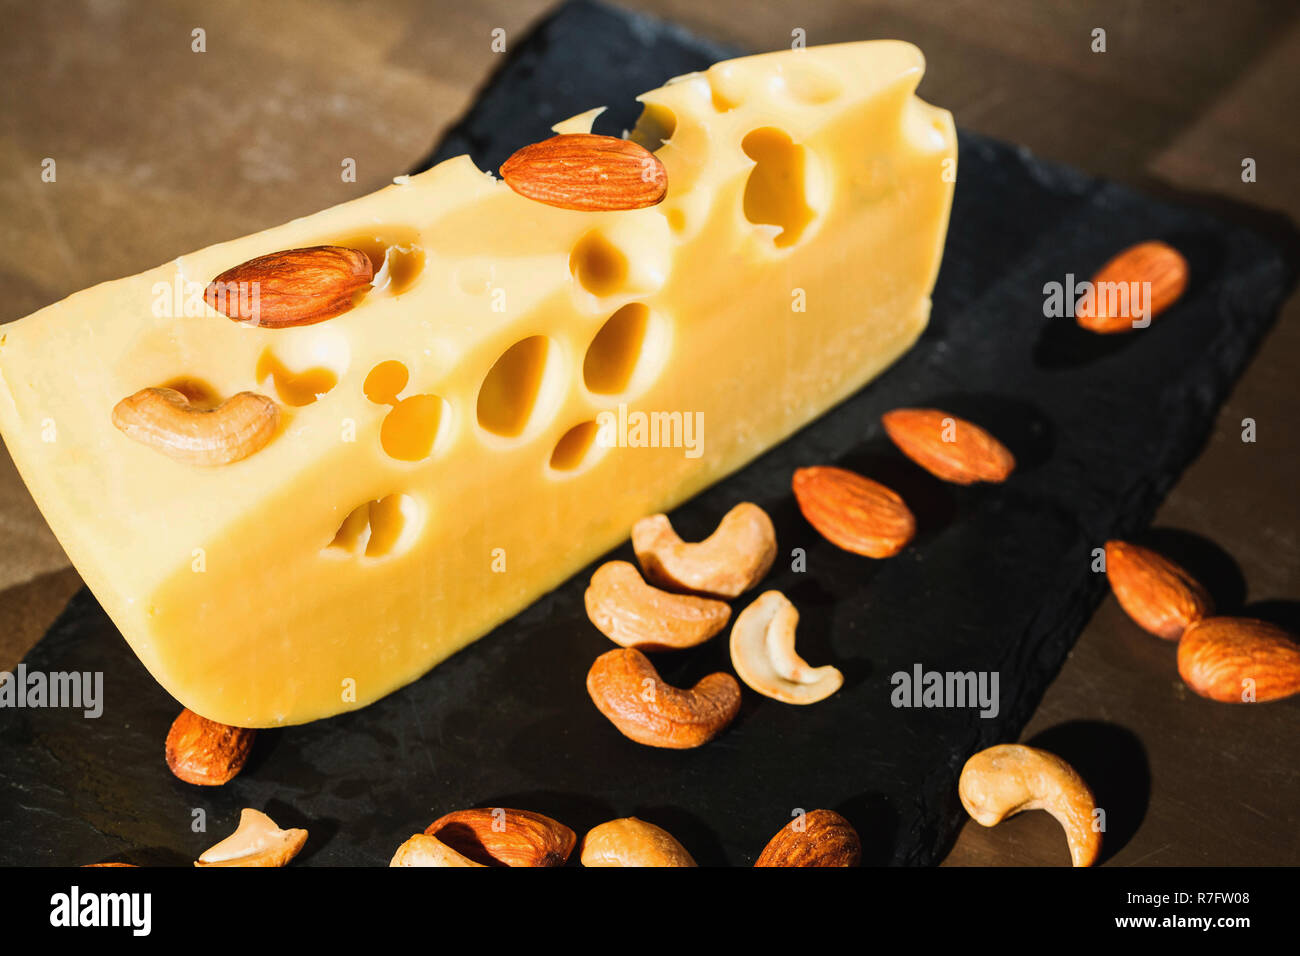 Almonds and peanuts on piece of tasty Swiss cheese Stock Photo